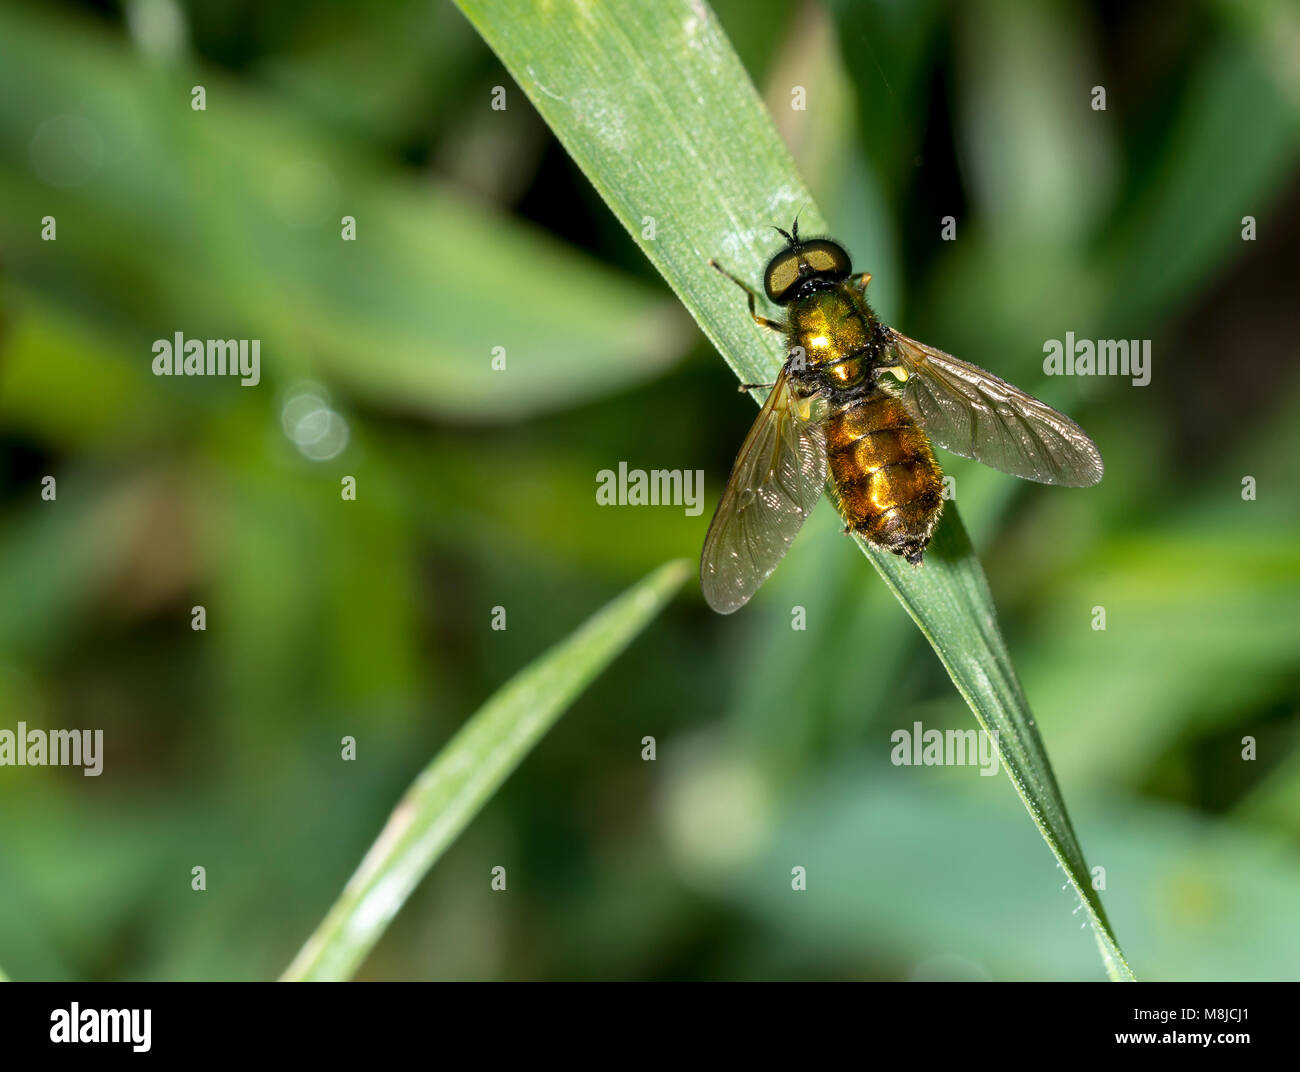 fly with golden belly on a leaf Diptera Insect, fly insect Stock Photo -  Alamy